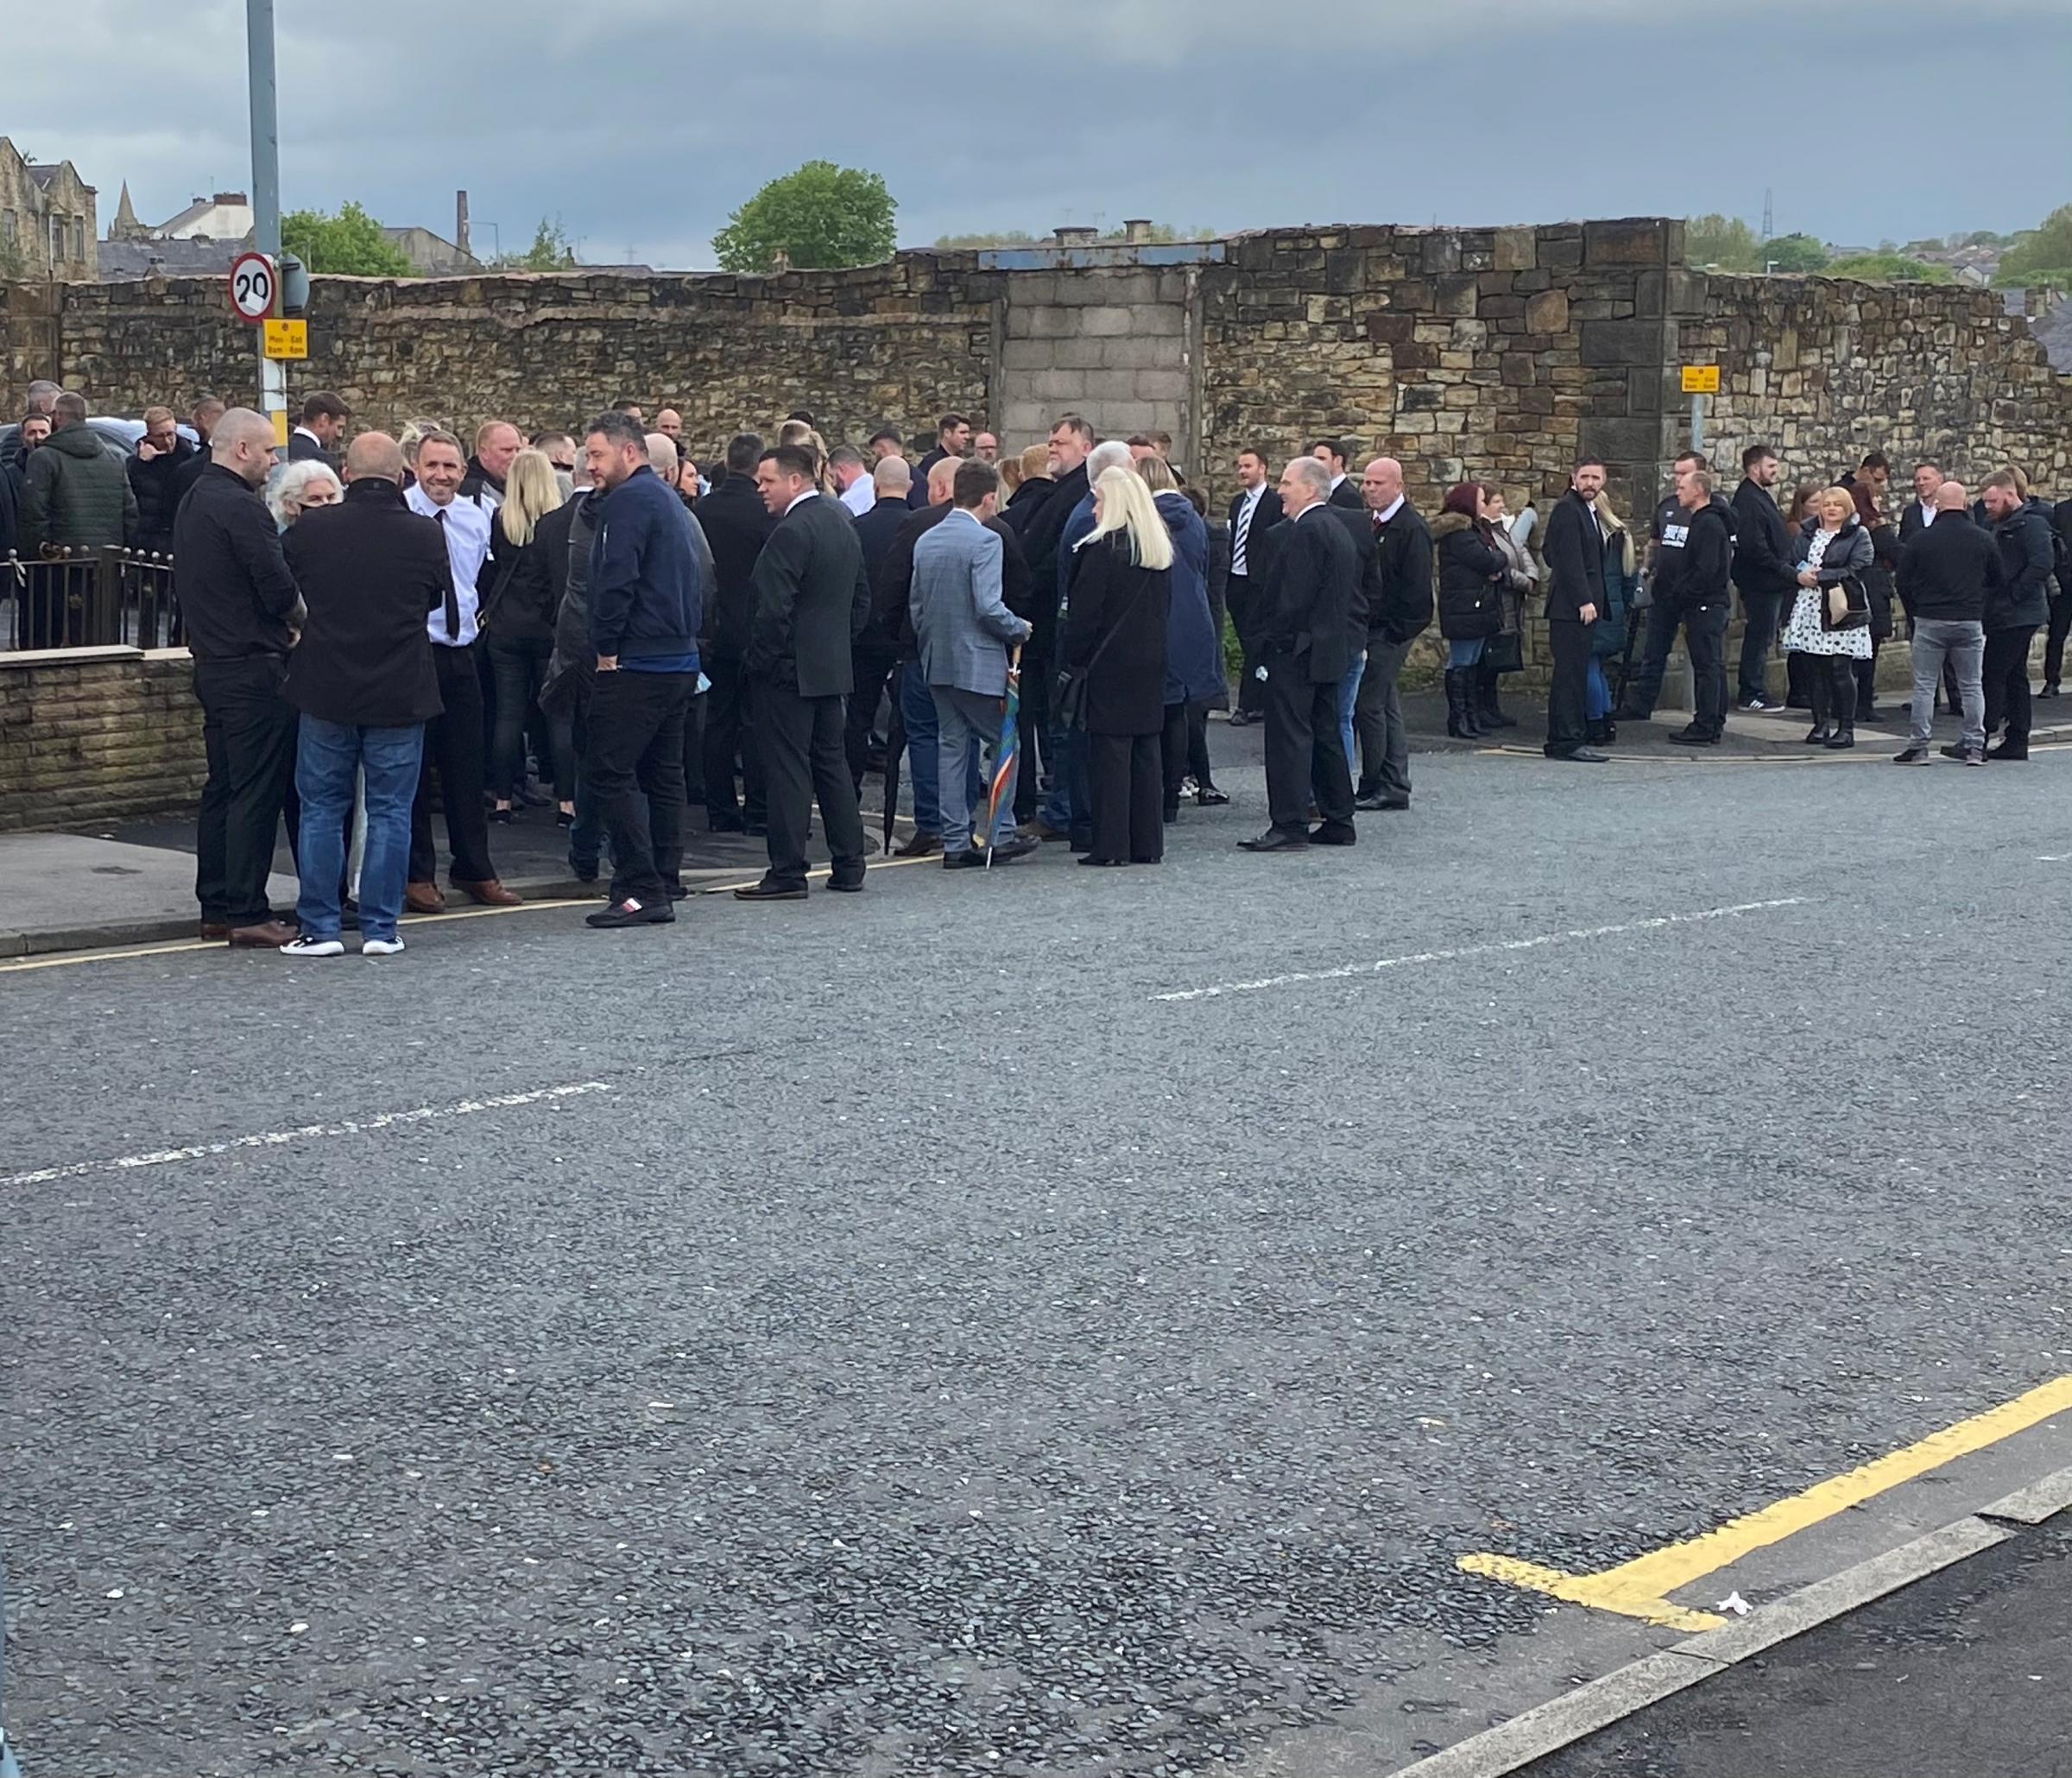 RESPECT: Hundreds of mourners attend the funeral of James Dean in Oswaldtwistle